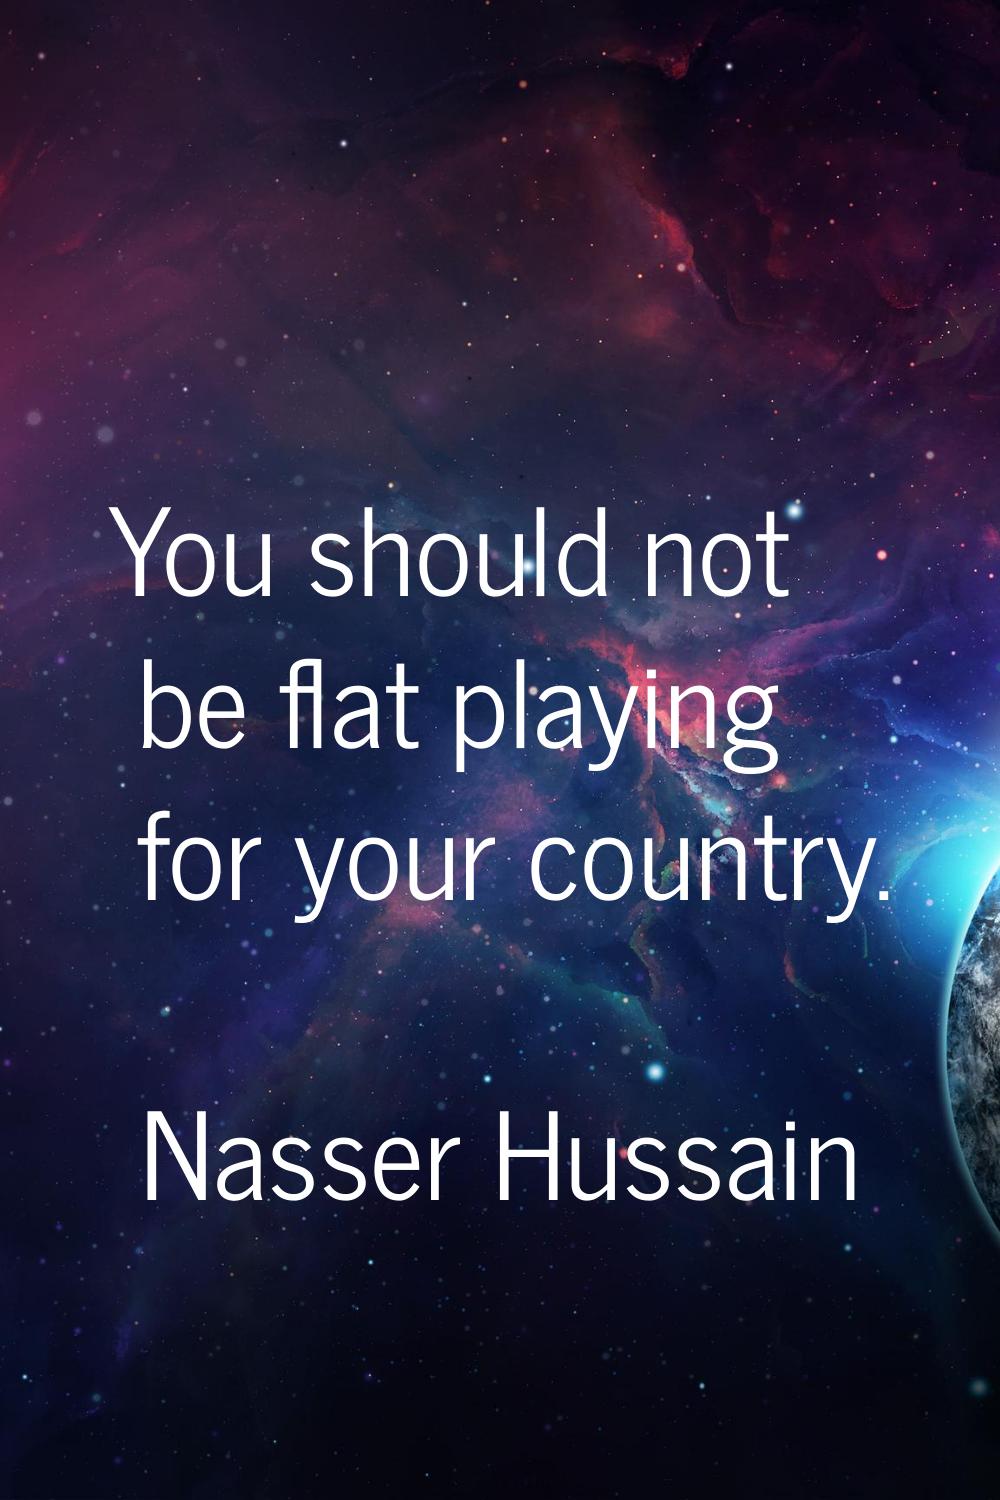 You should not be flat playing for your country.